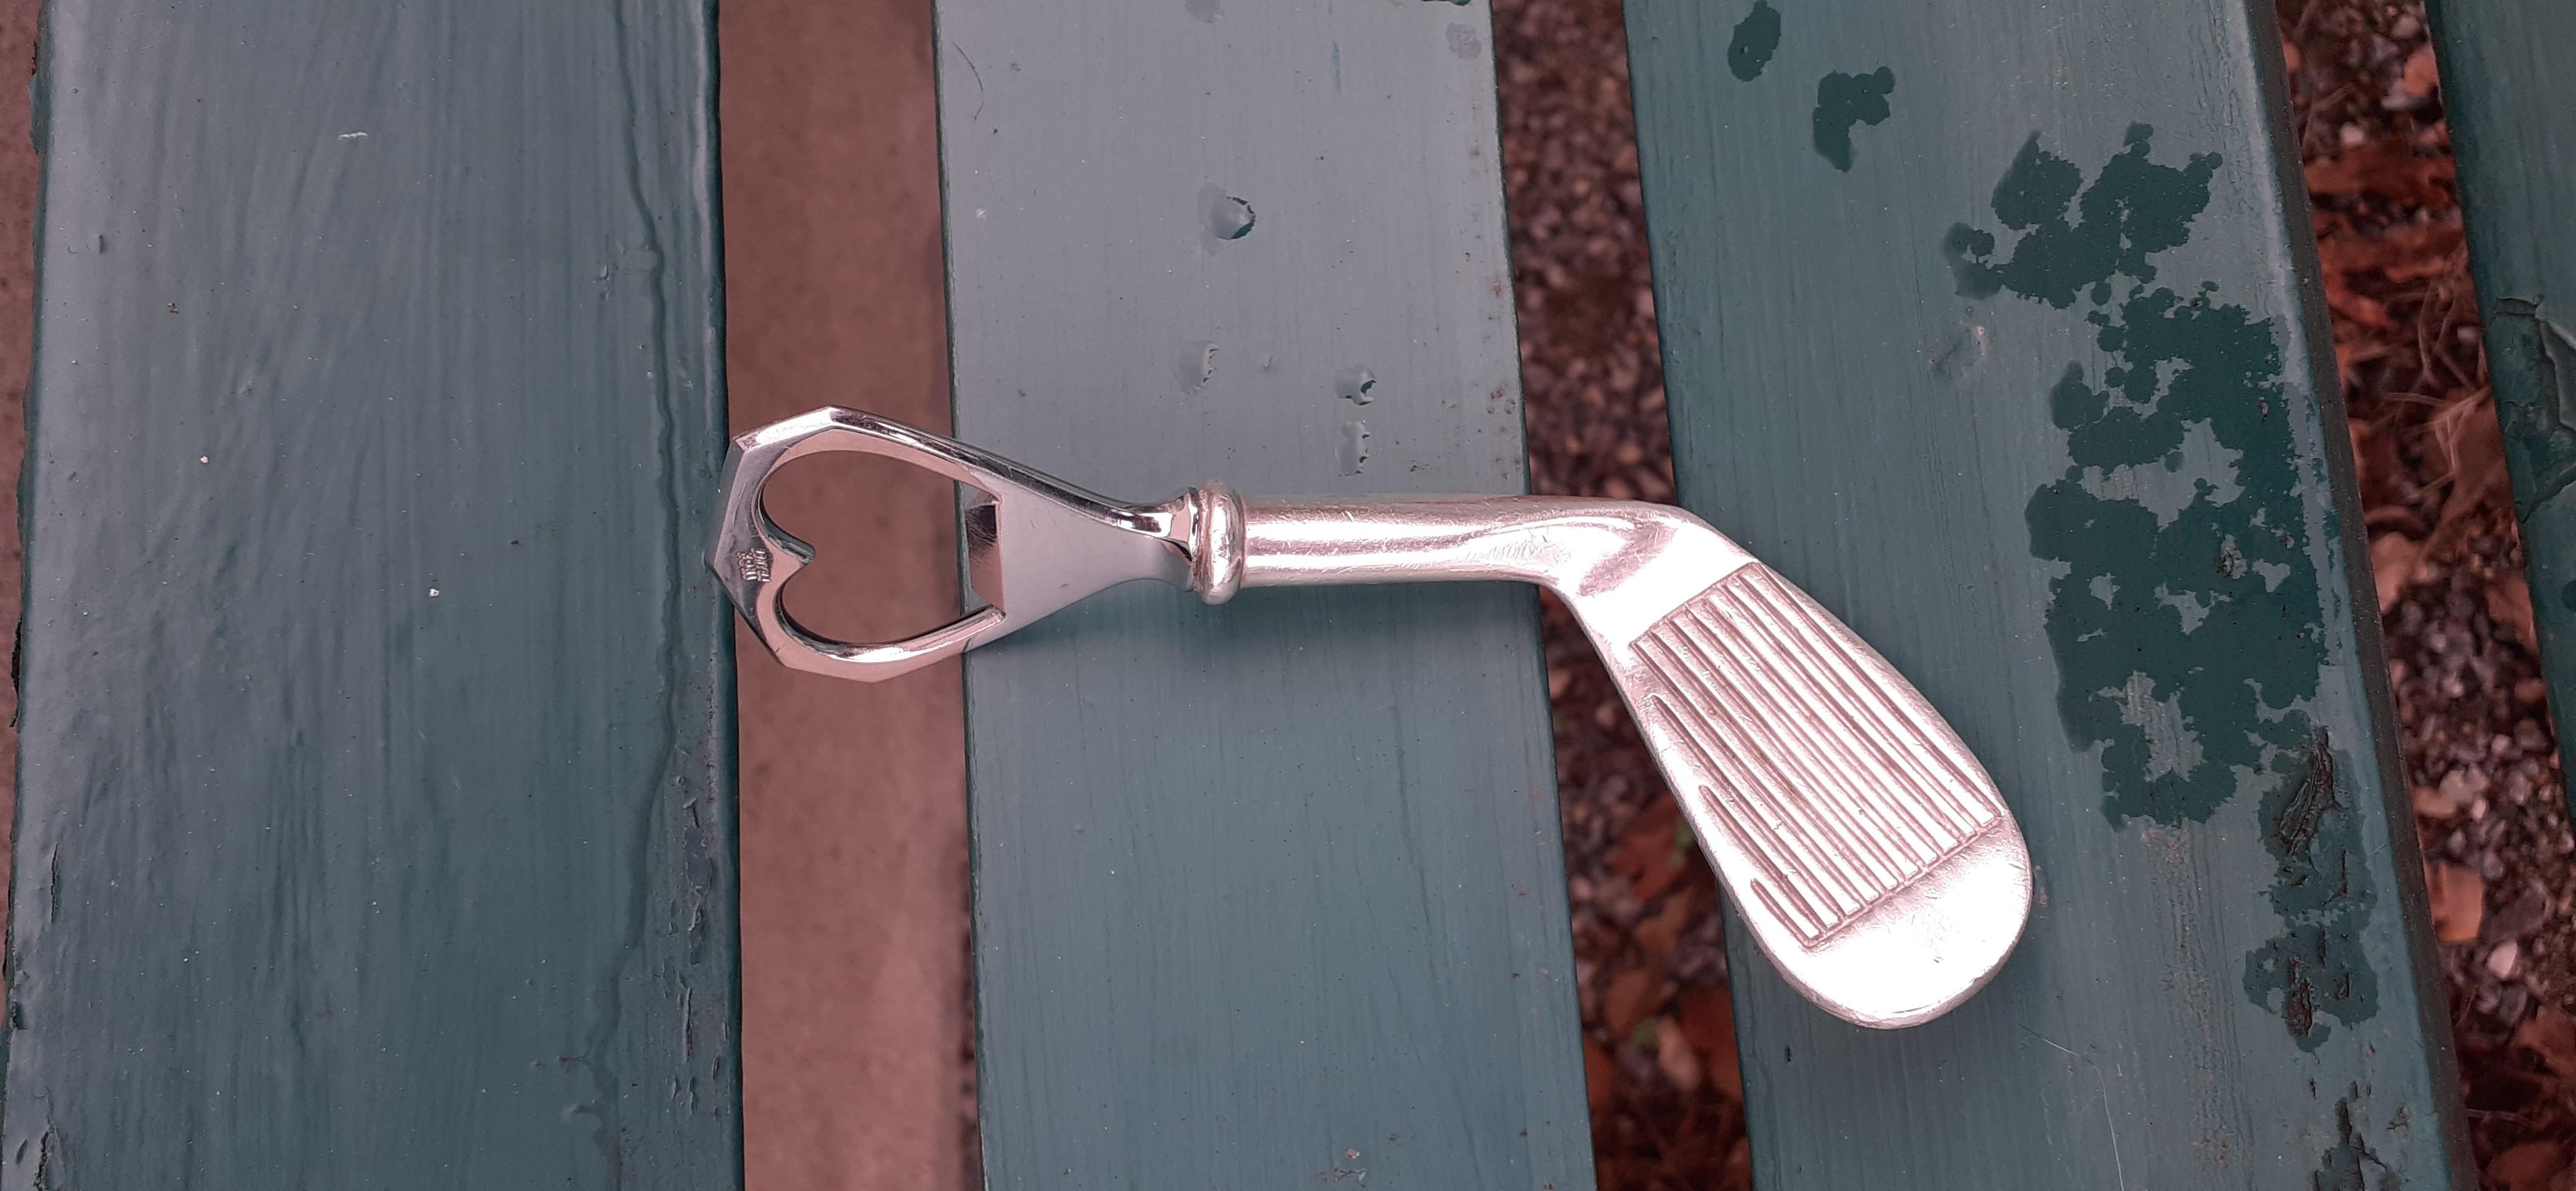 Rare Authentic Hermès Bottle Opener

Shaped like a golf club

Made in France

Vintage Item

Made of inox (stainless steel) and silver-tone non-precious metal

